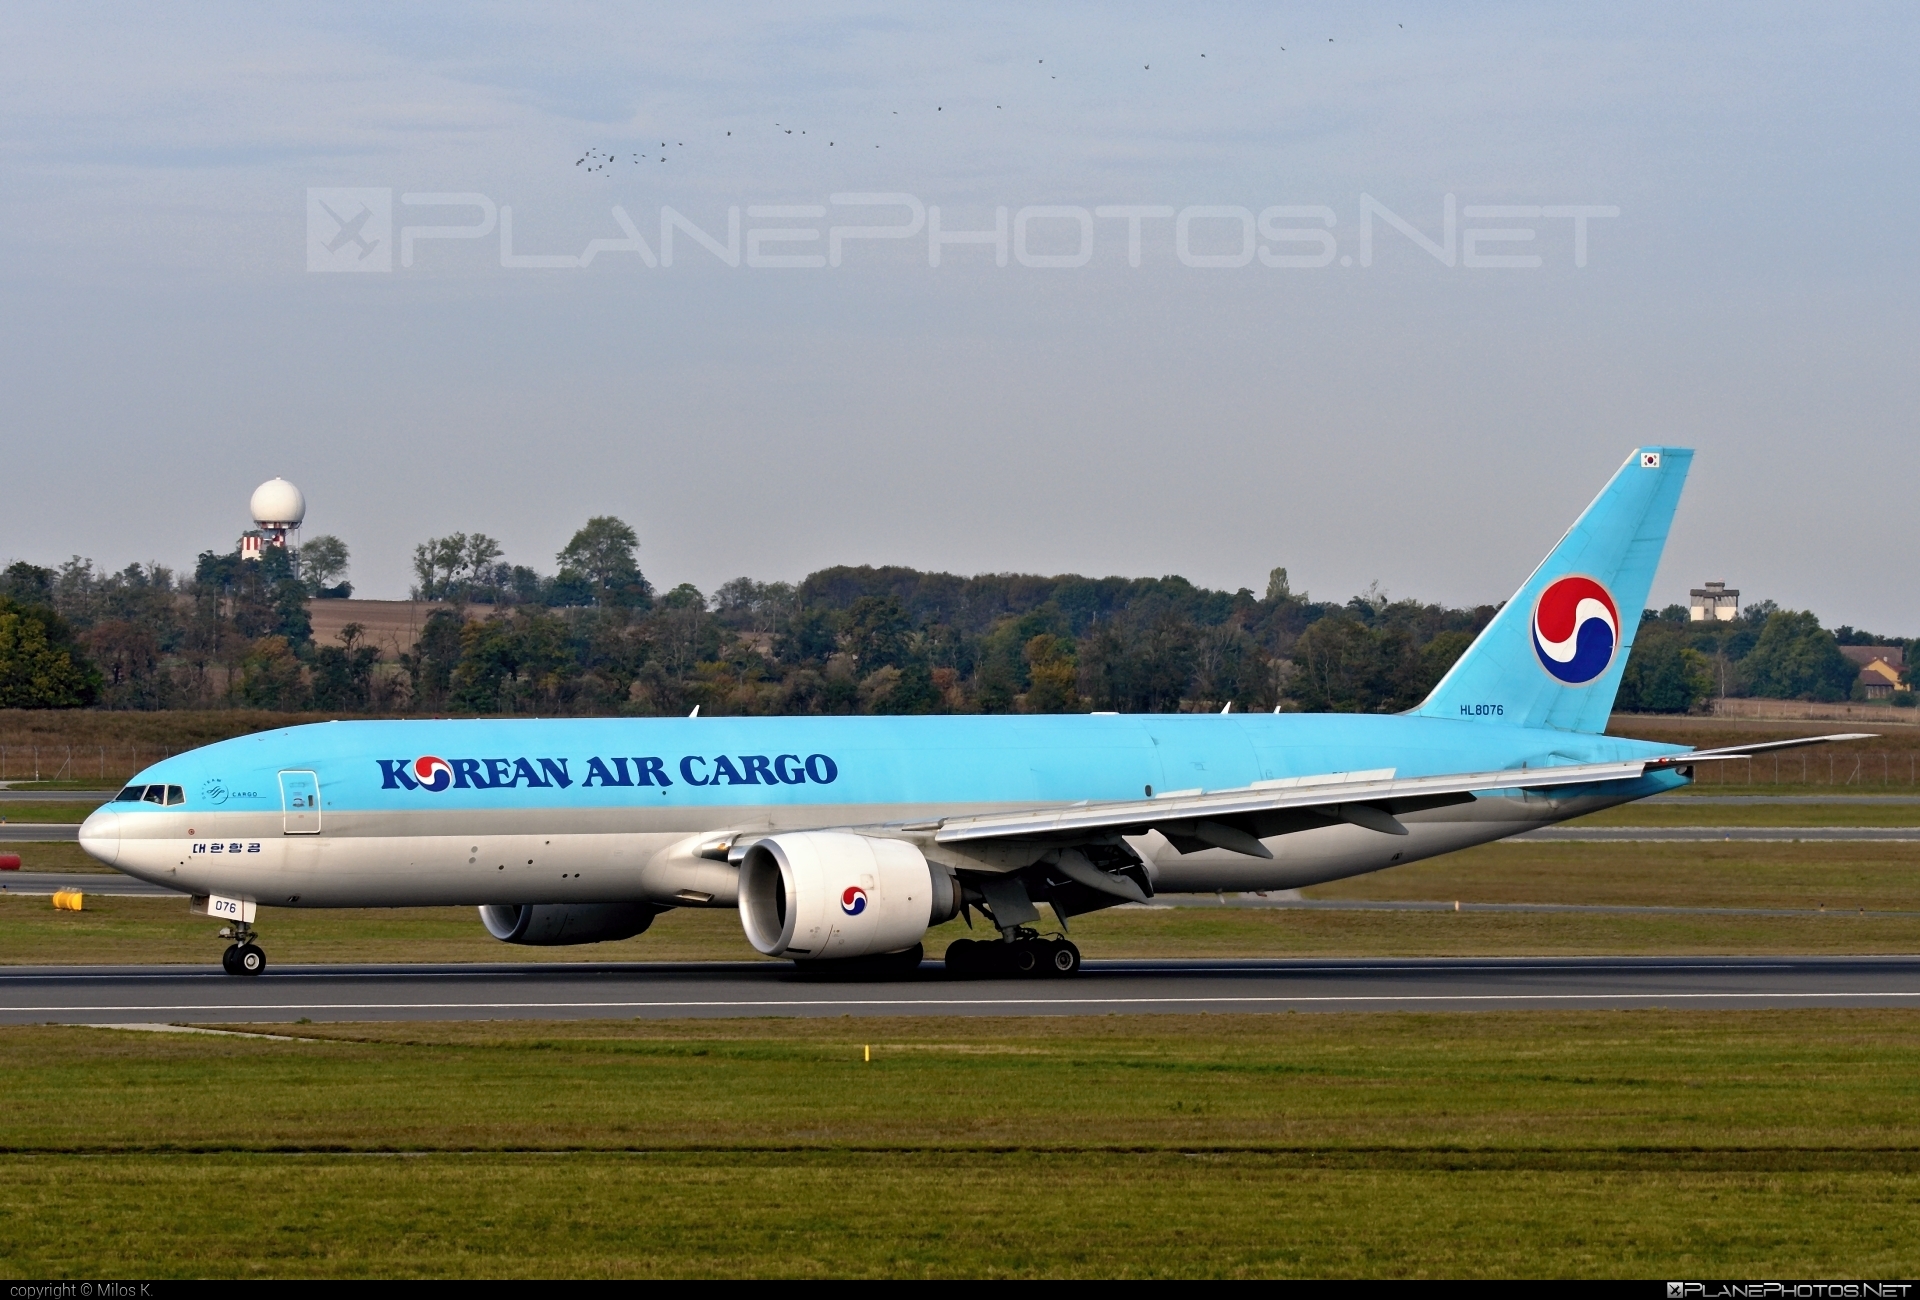 Boeing 777F - HL8076 operated by Korean Air Cargo #b777 #b777f #b777freighter #boeing #boeing777 #koreanair #koreanaircargo #tripleseven